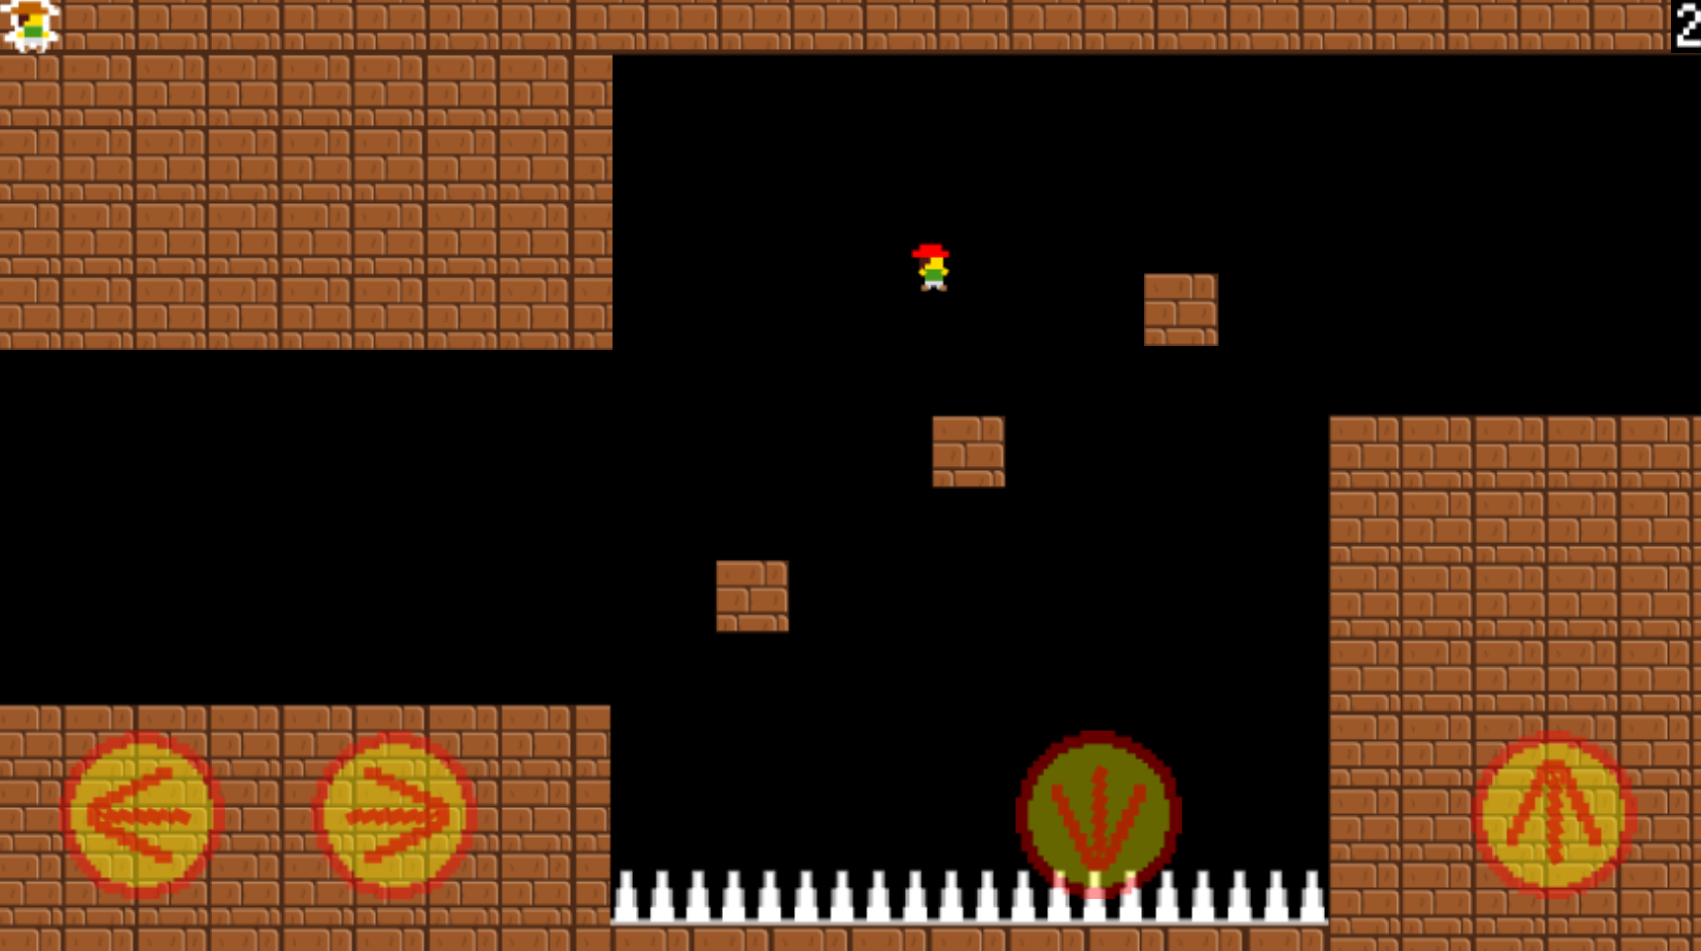 Screenshot 1 of Trap Impossible 2 - The Game 1.0.0